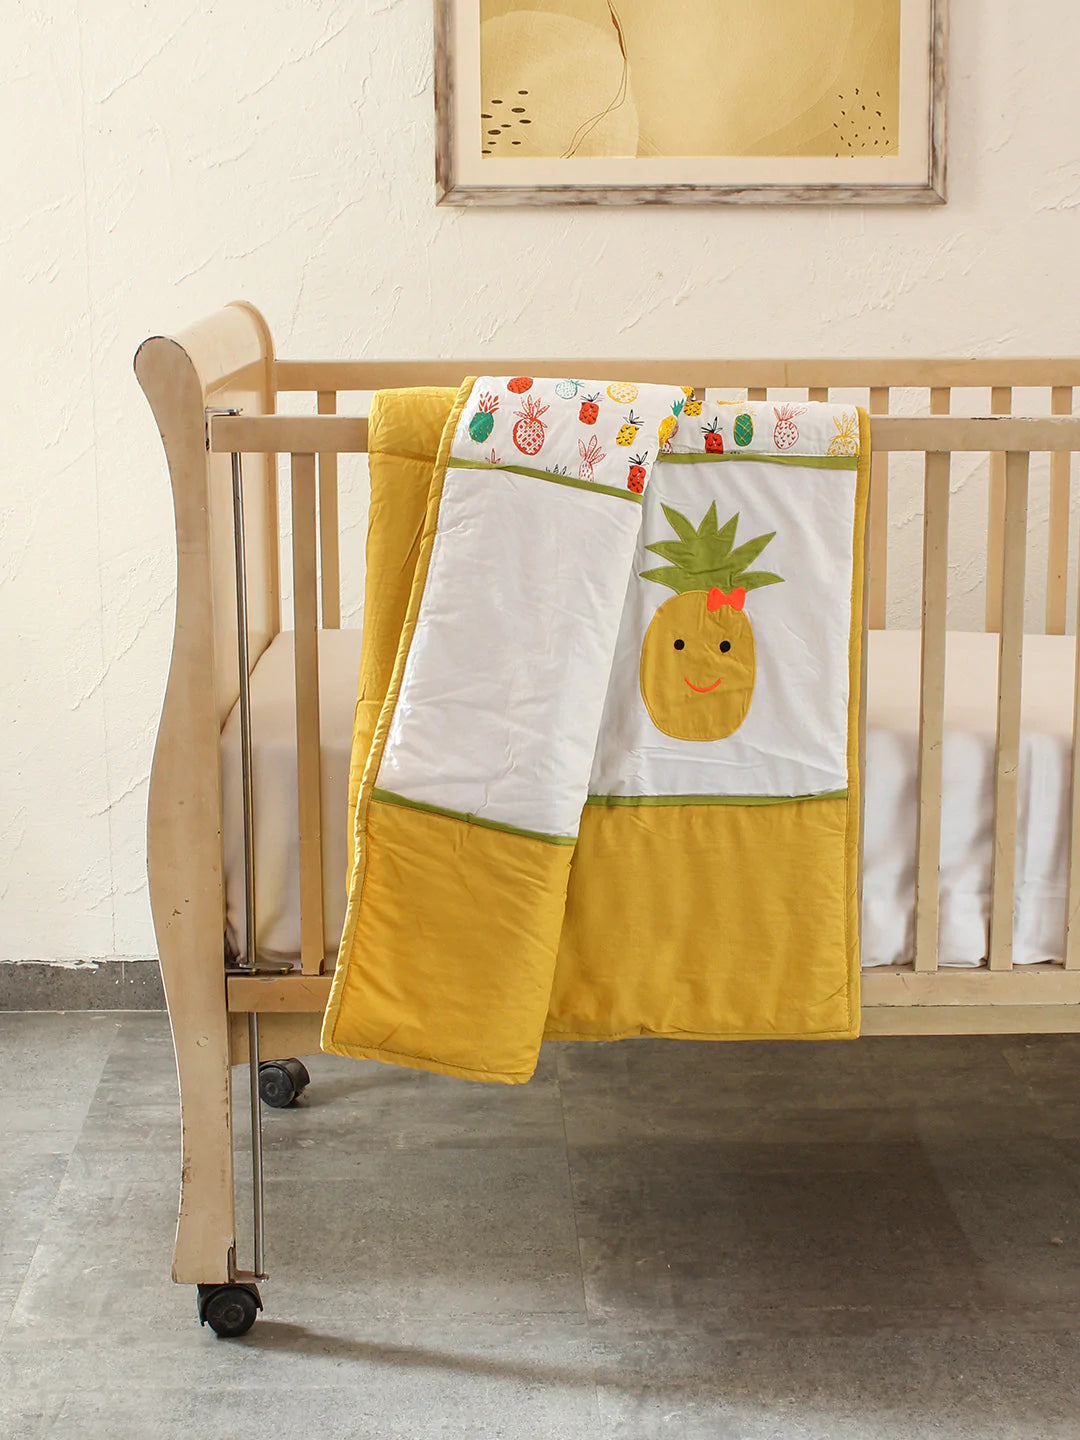 The Juicy Pineapple Quilt